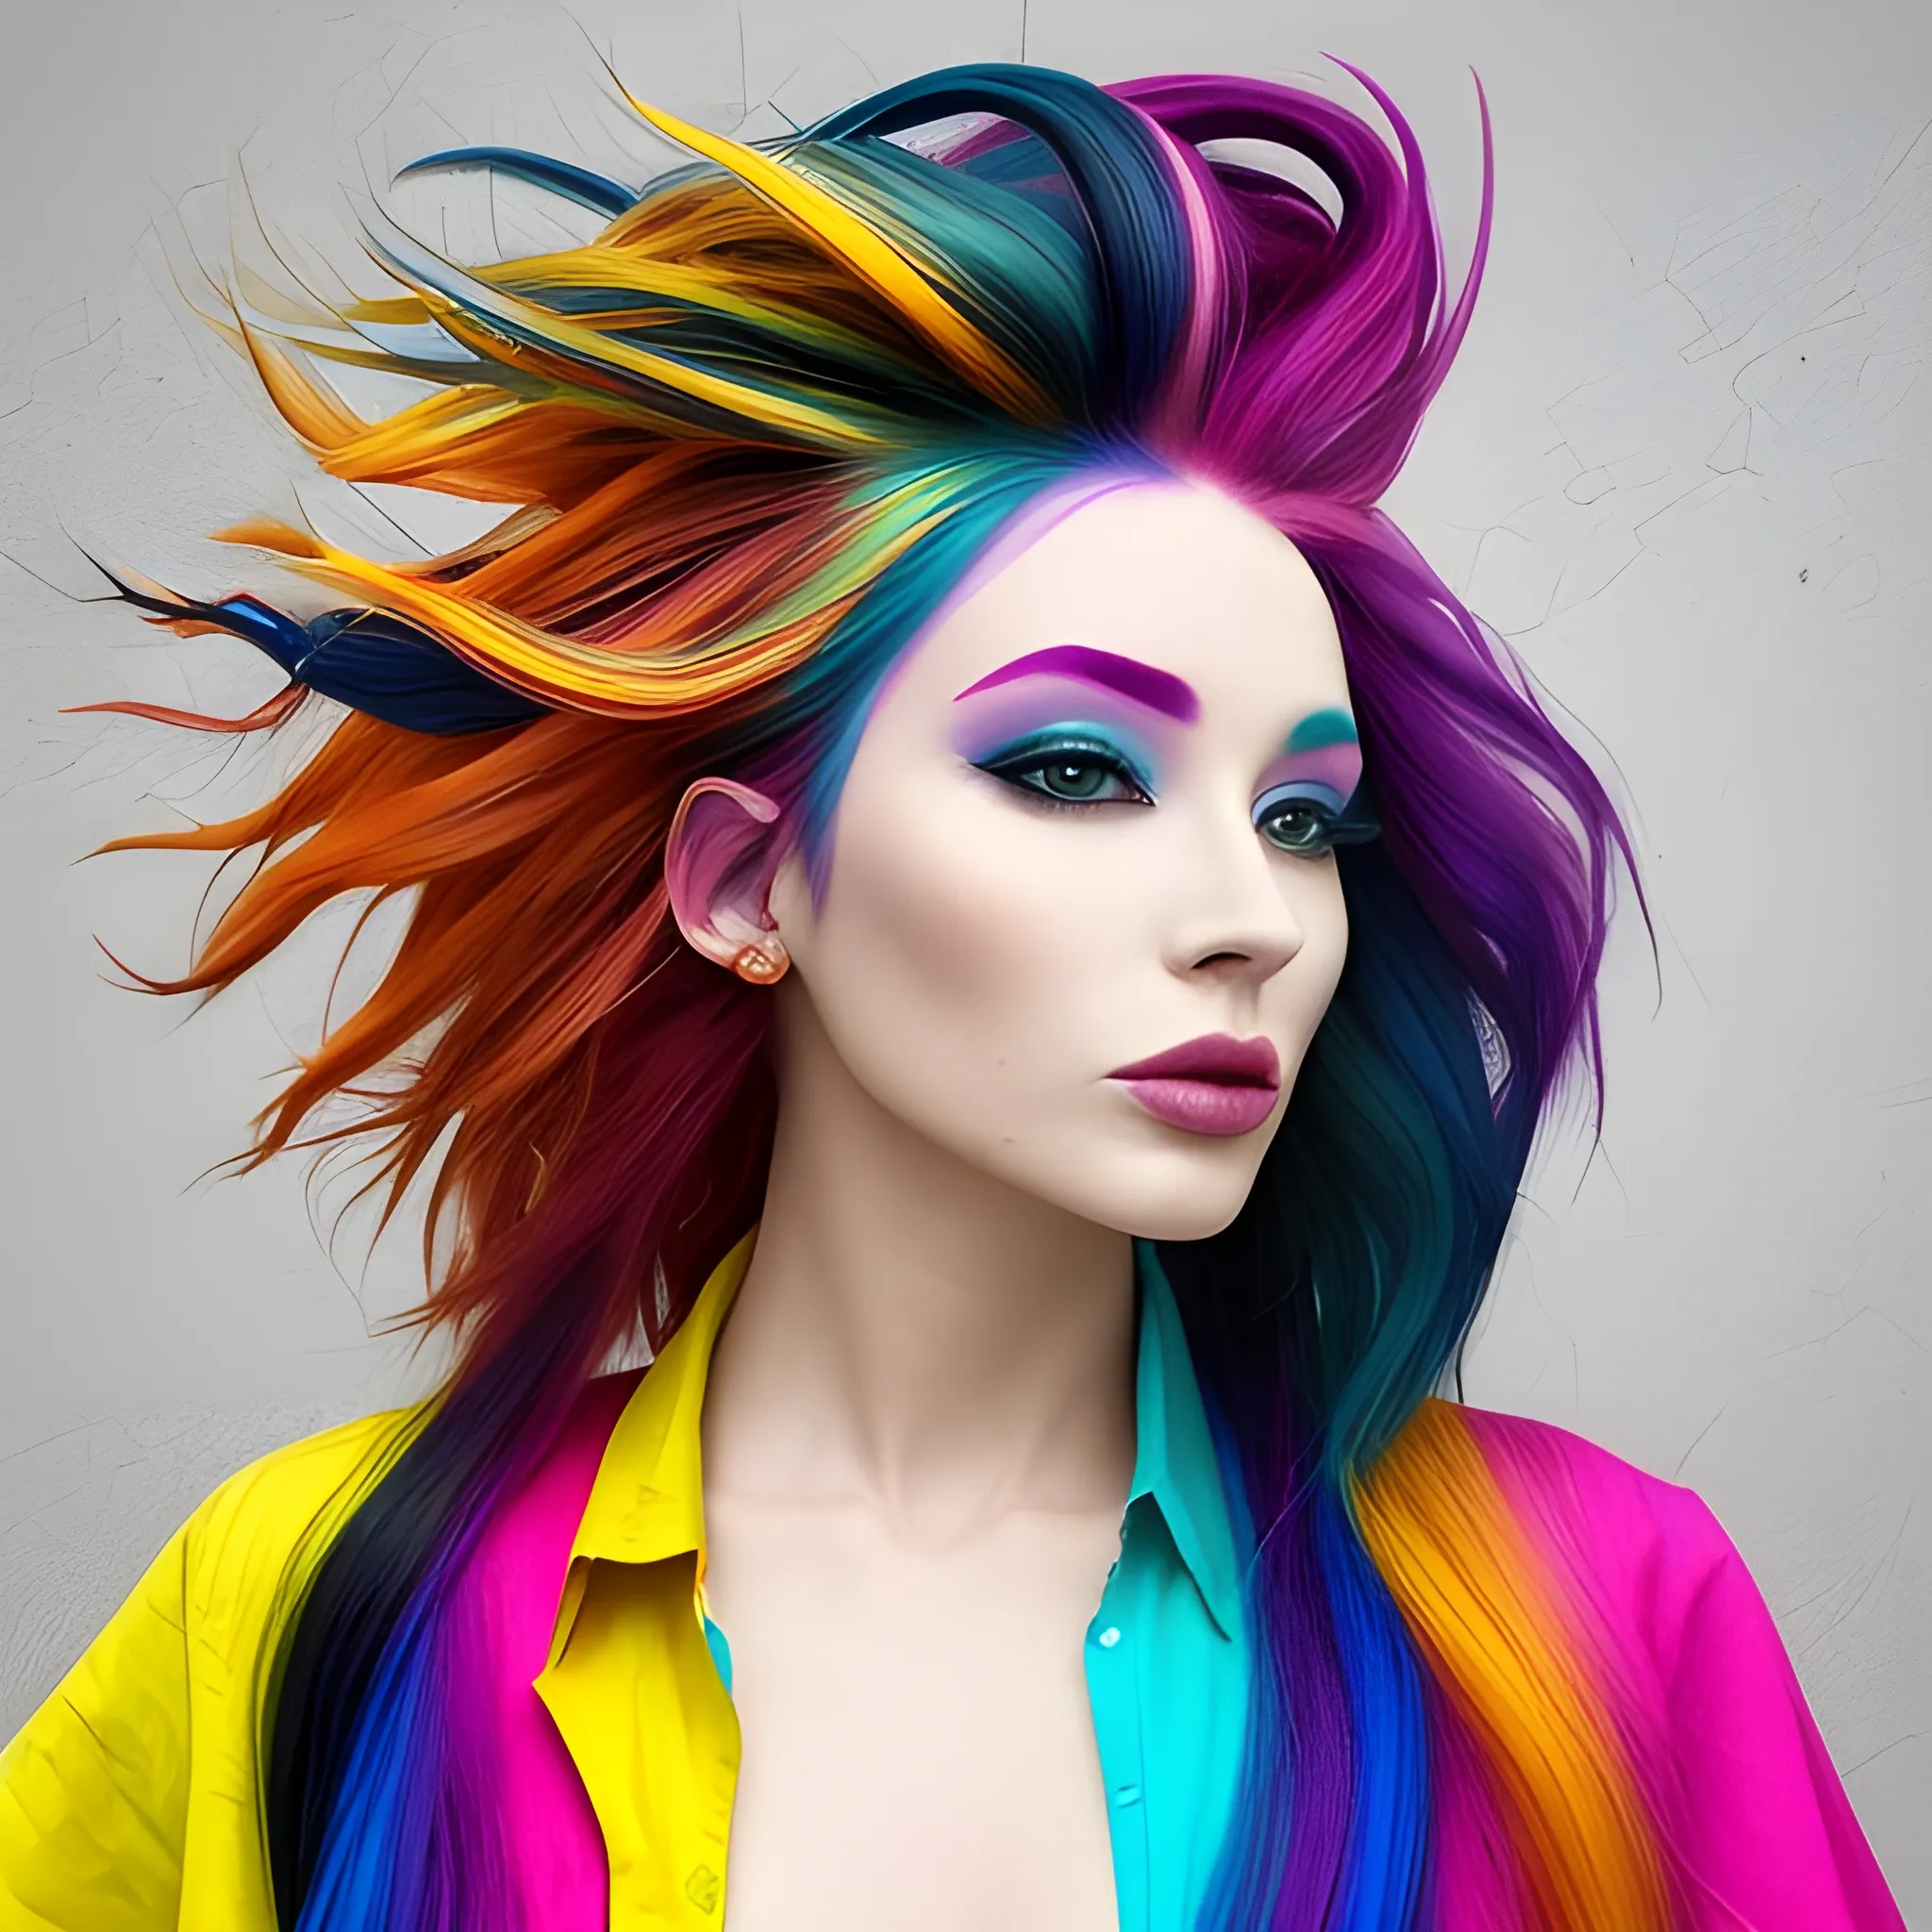 the woman is wearing multicolored hair, vibrant color scheme